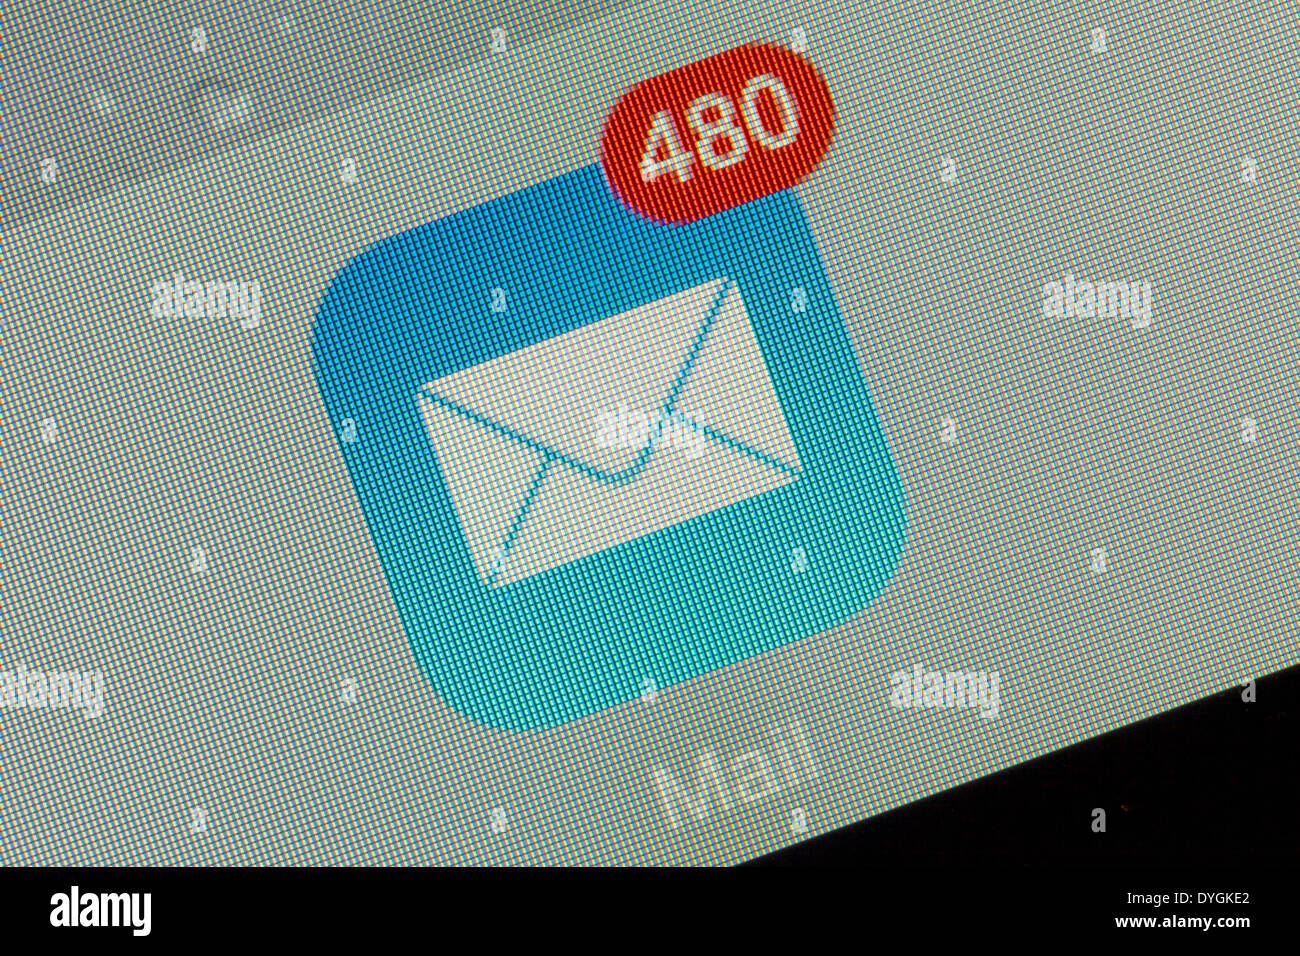 Full eMail inbox logo app icon with emails waiting on an iPad Stock Photo